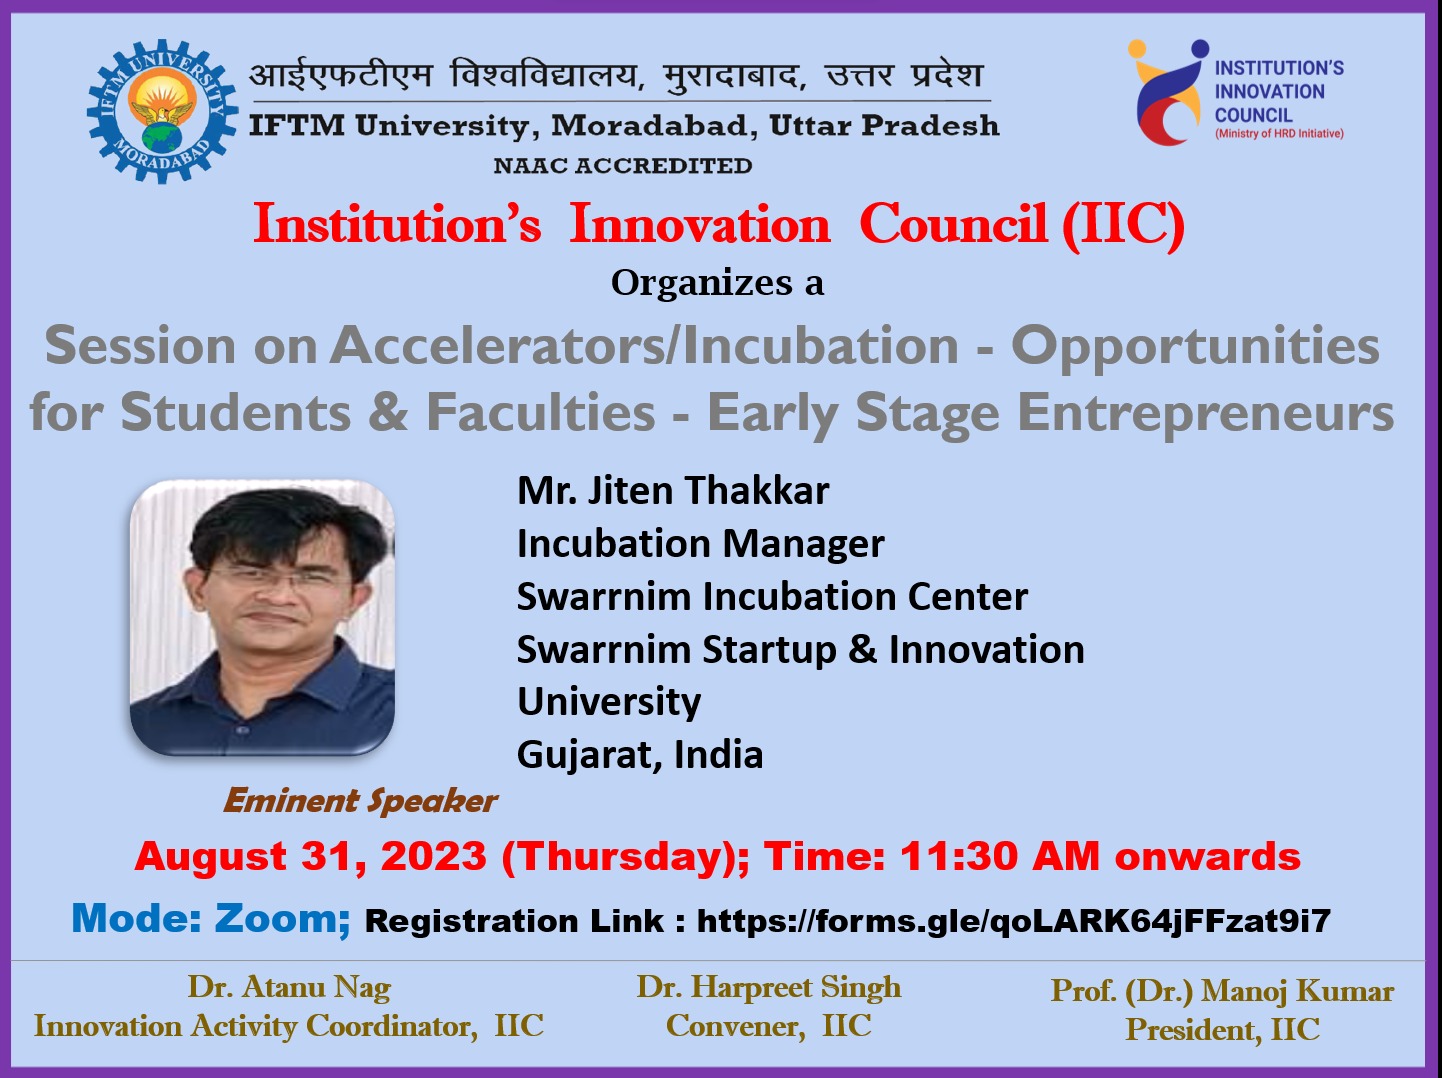 Session on Accelerators/Incubation - Opportunities for Students & Faculties - Early Stage Entrepreneurs